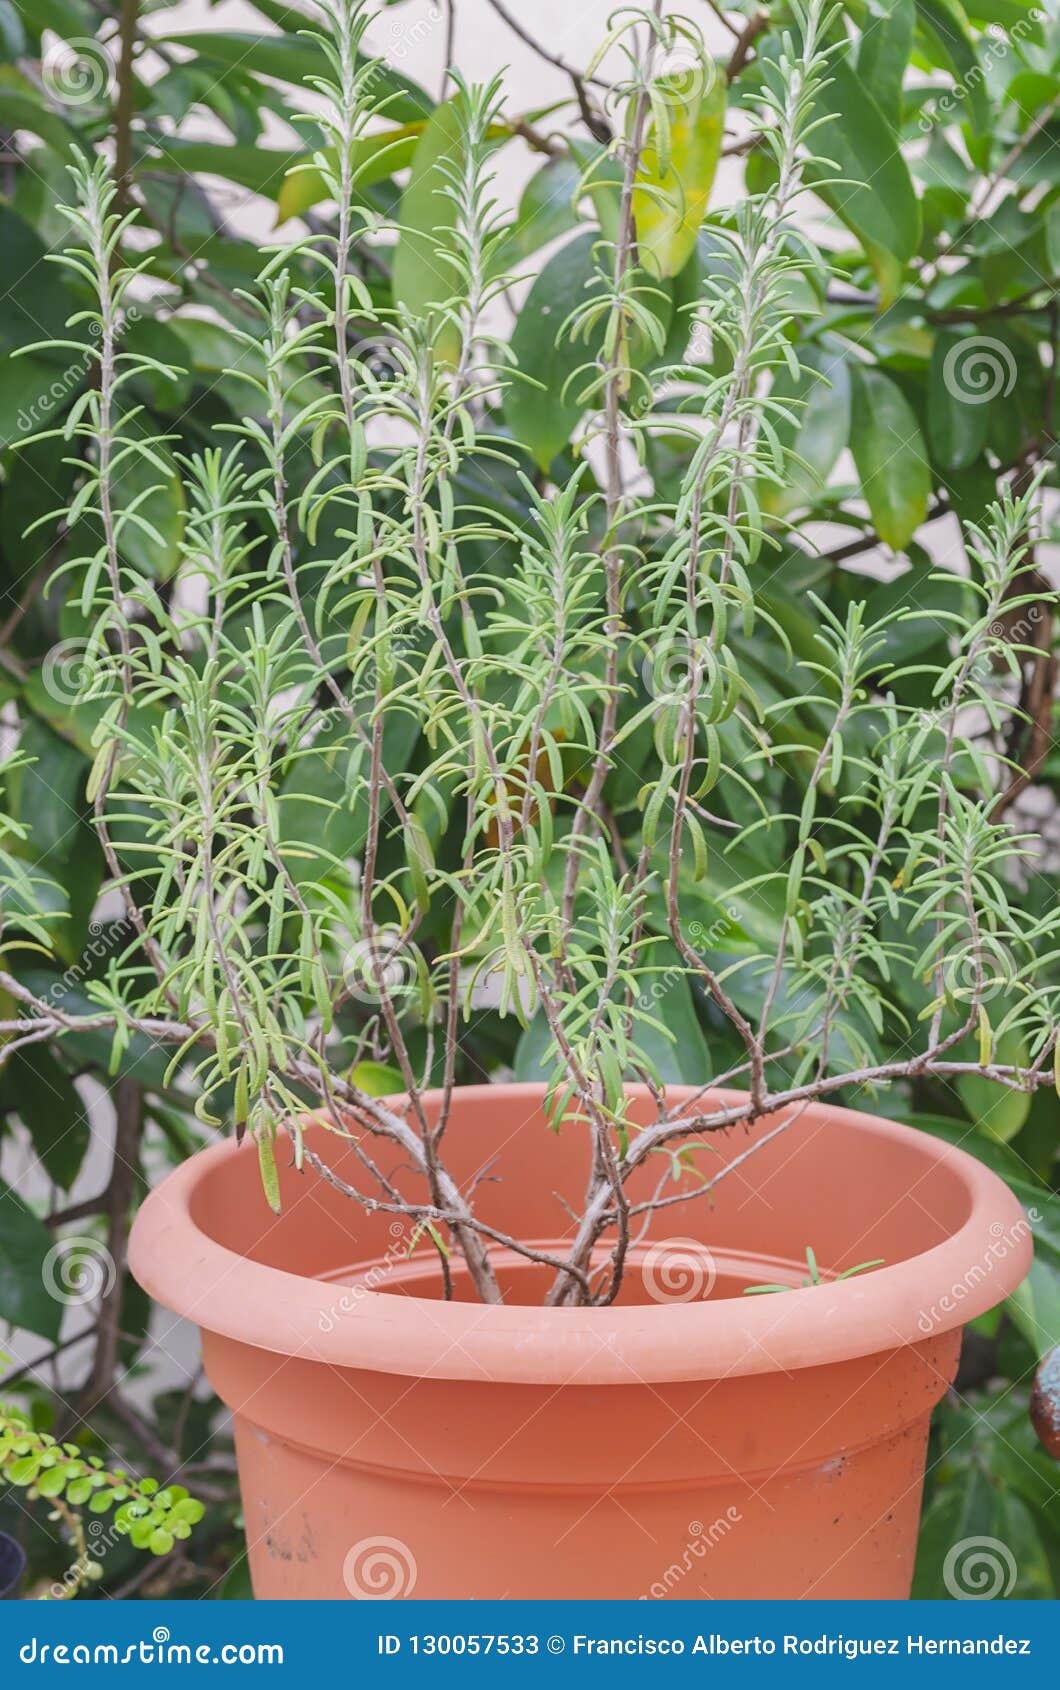 Rosemary Plant Growing In The Garden Stock Image Image Of